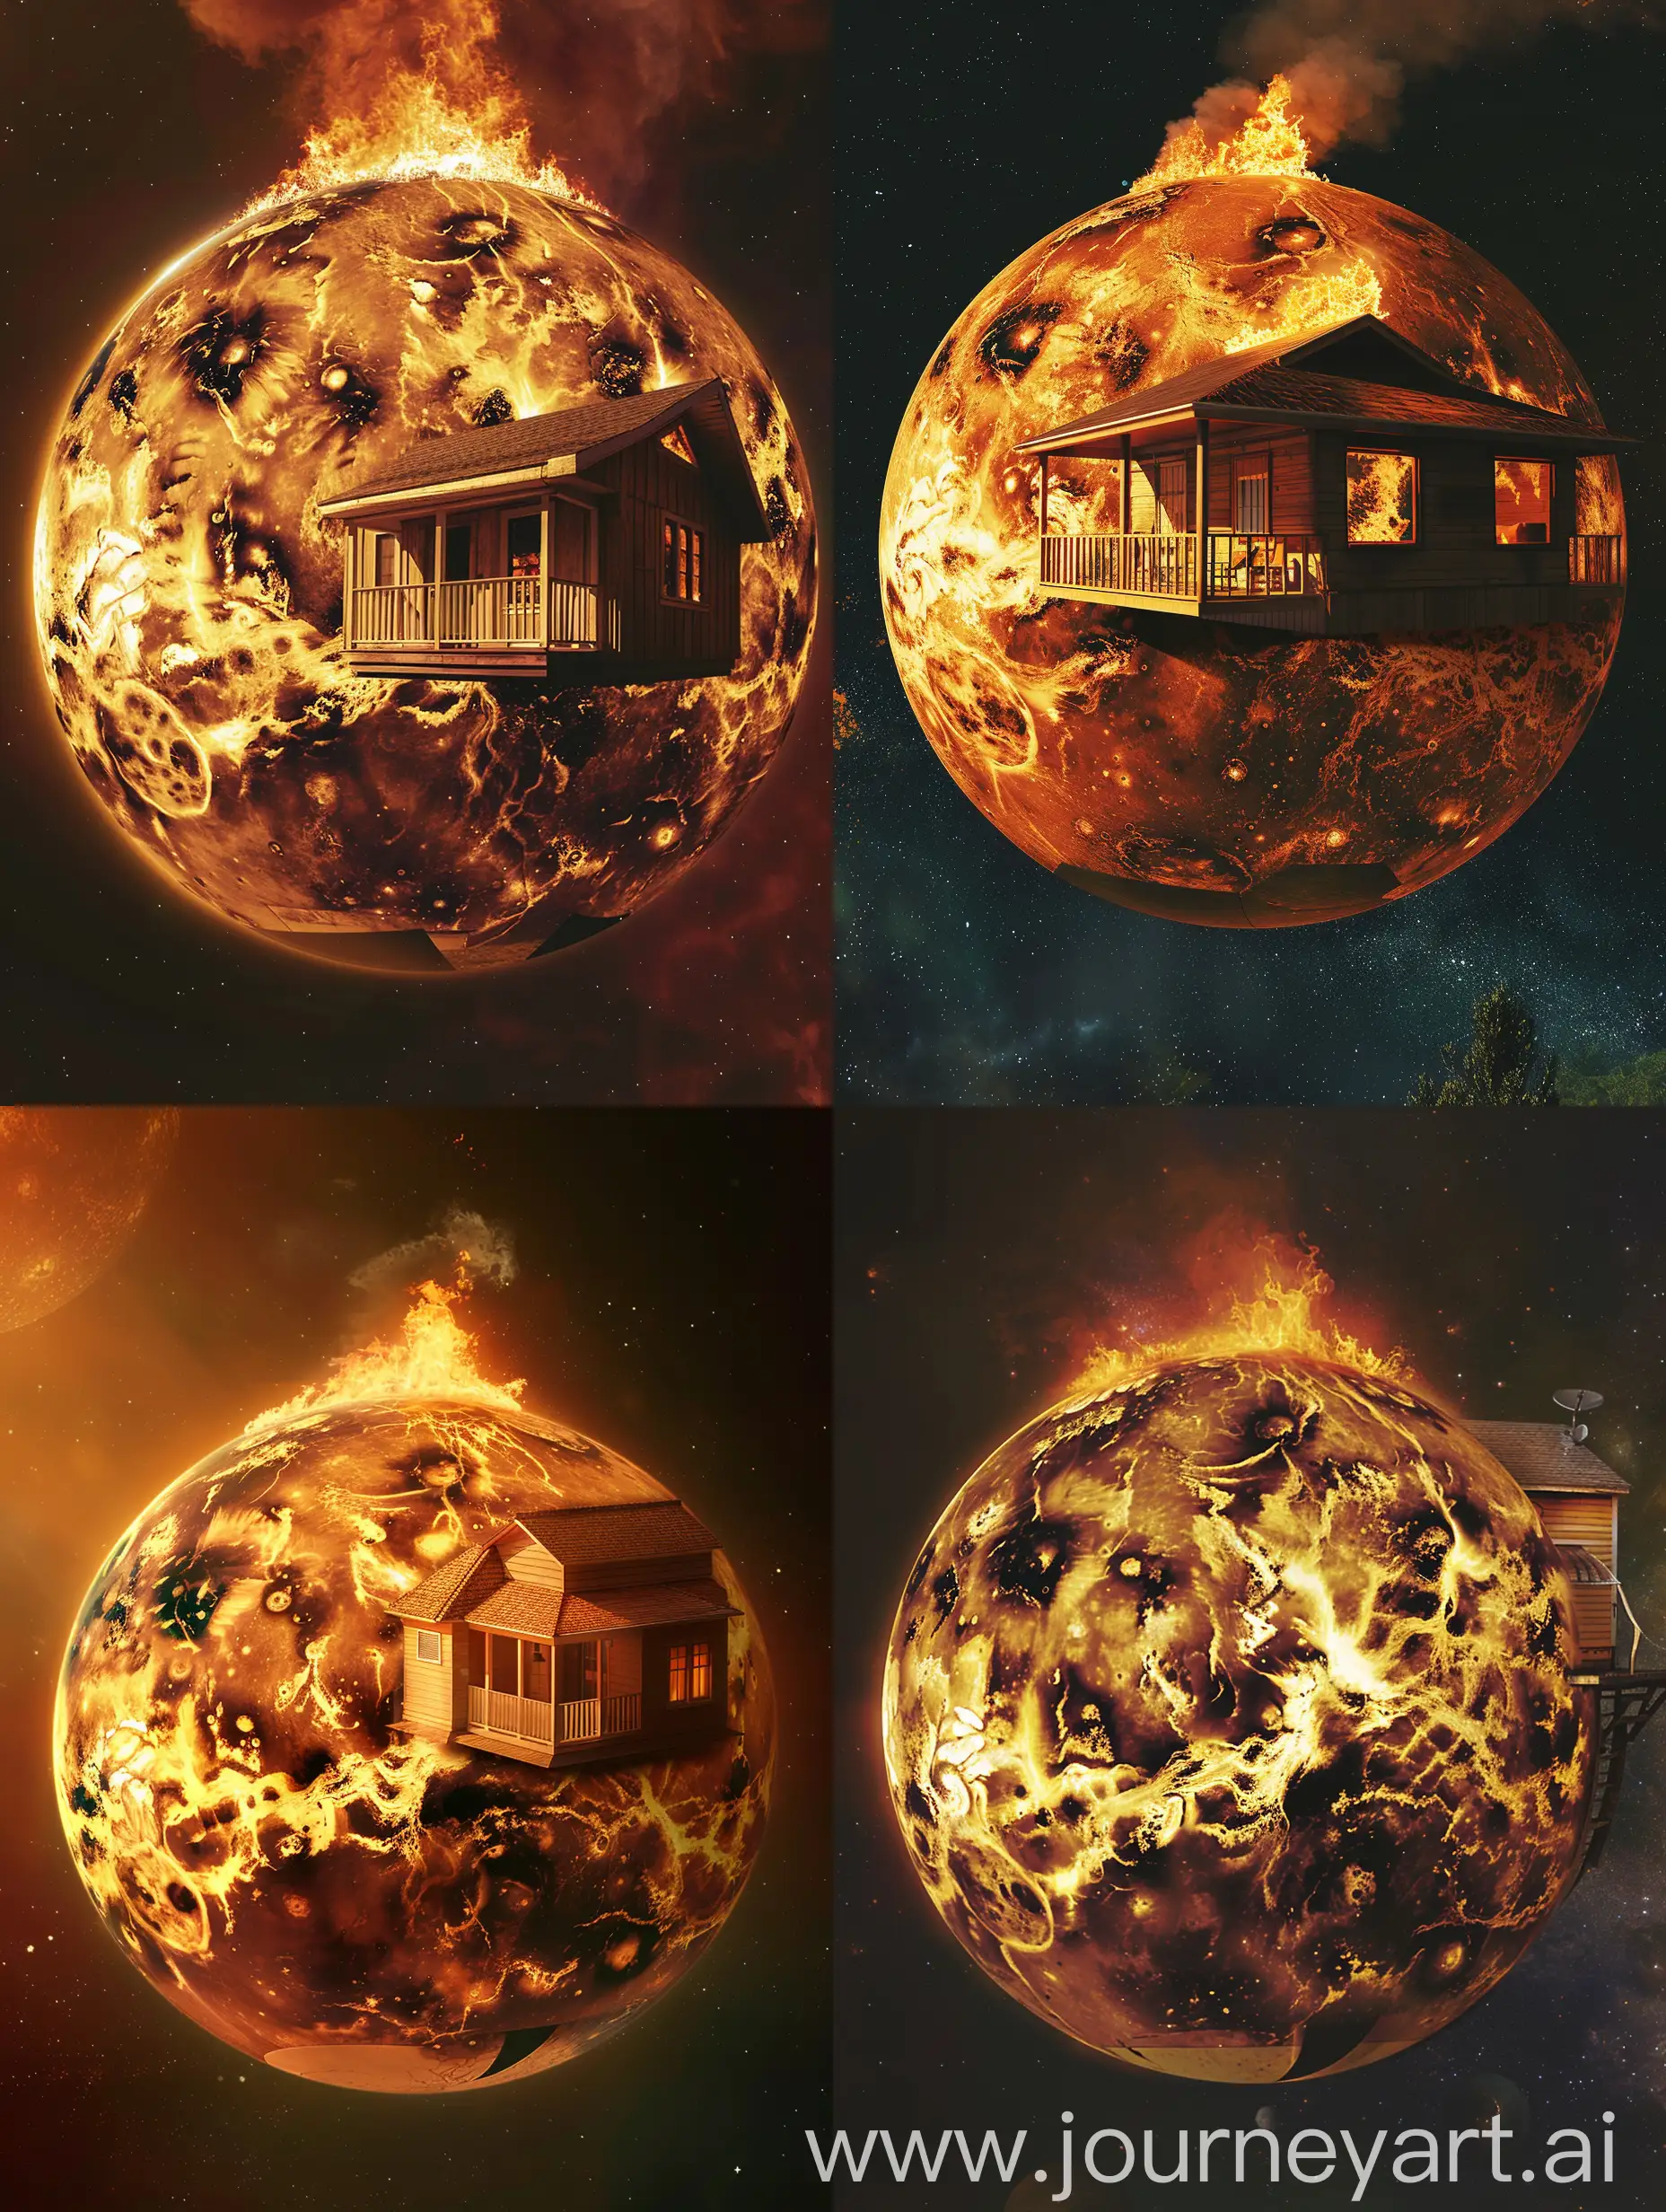 The sphere of the planet Venus in outer space, there is a one-story house with a porch on the planet, a fire on the roof of the house, high detail